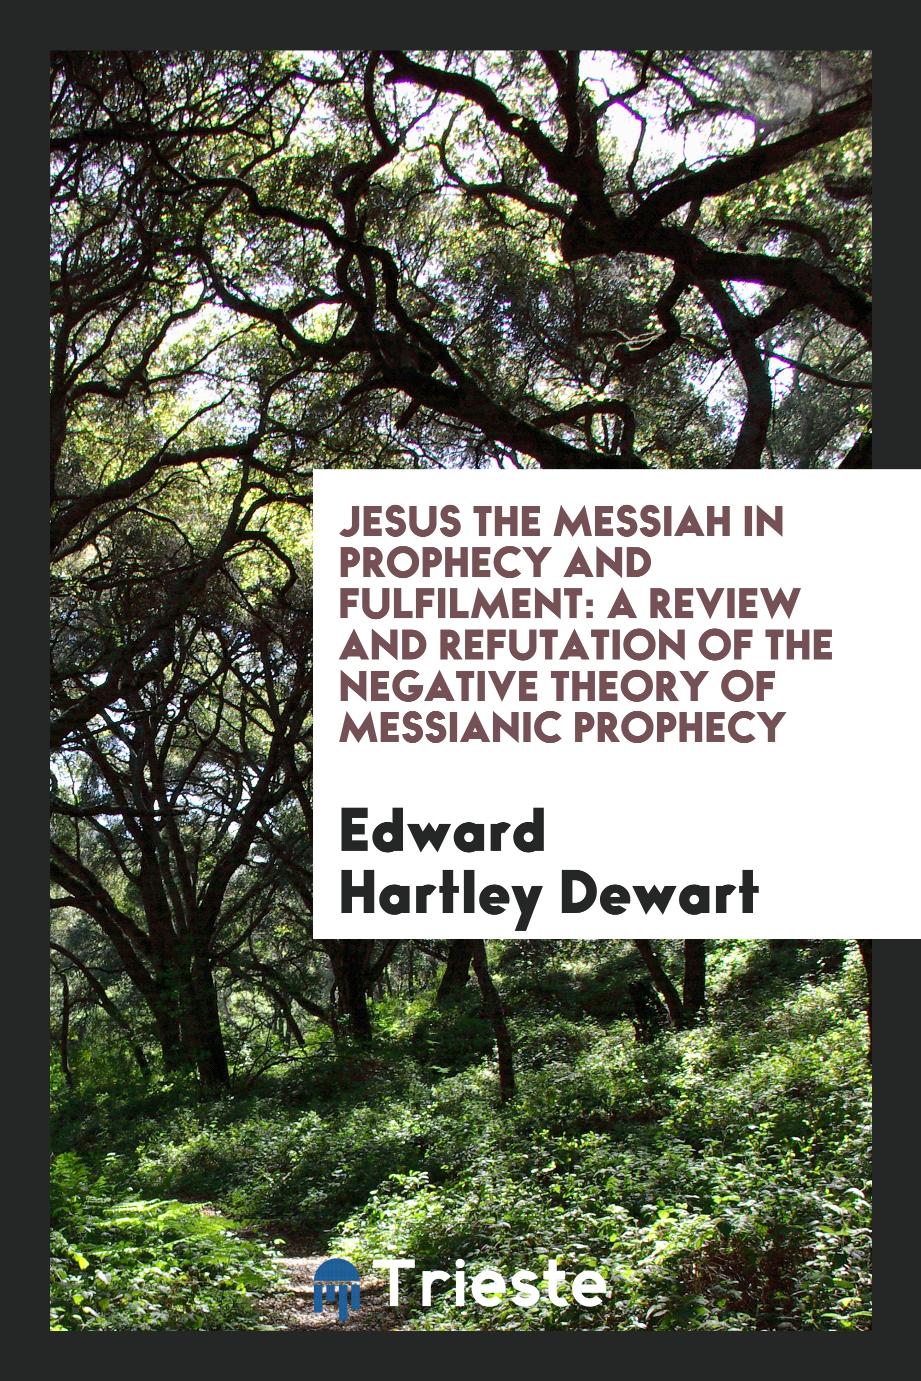 Jesus the Messiah in prophecy and fulfilment: a review and refutation of the negative theory of messianic prophecy